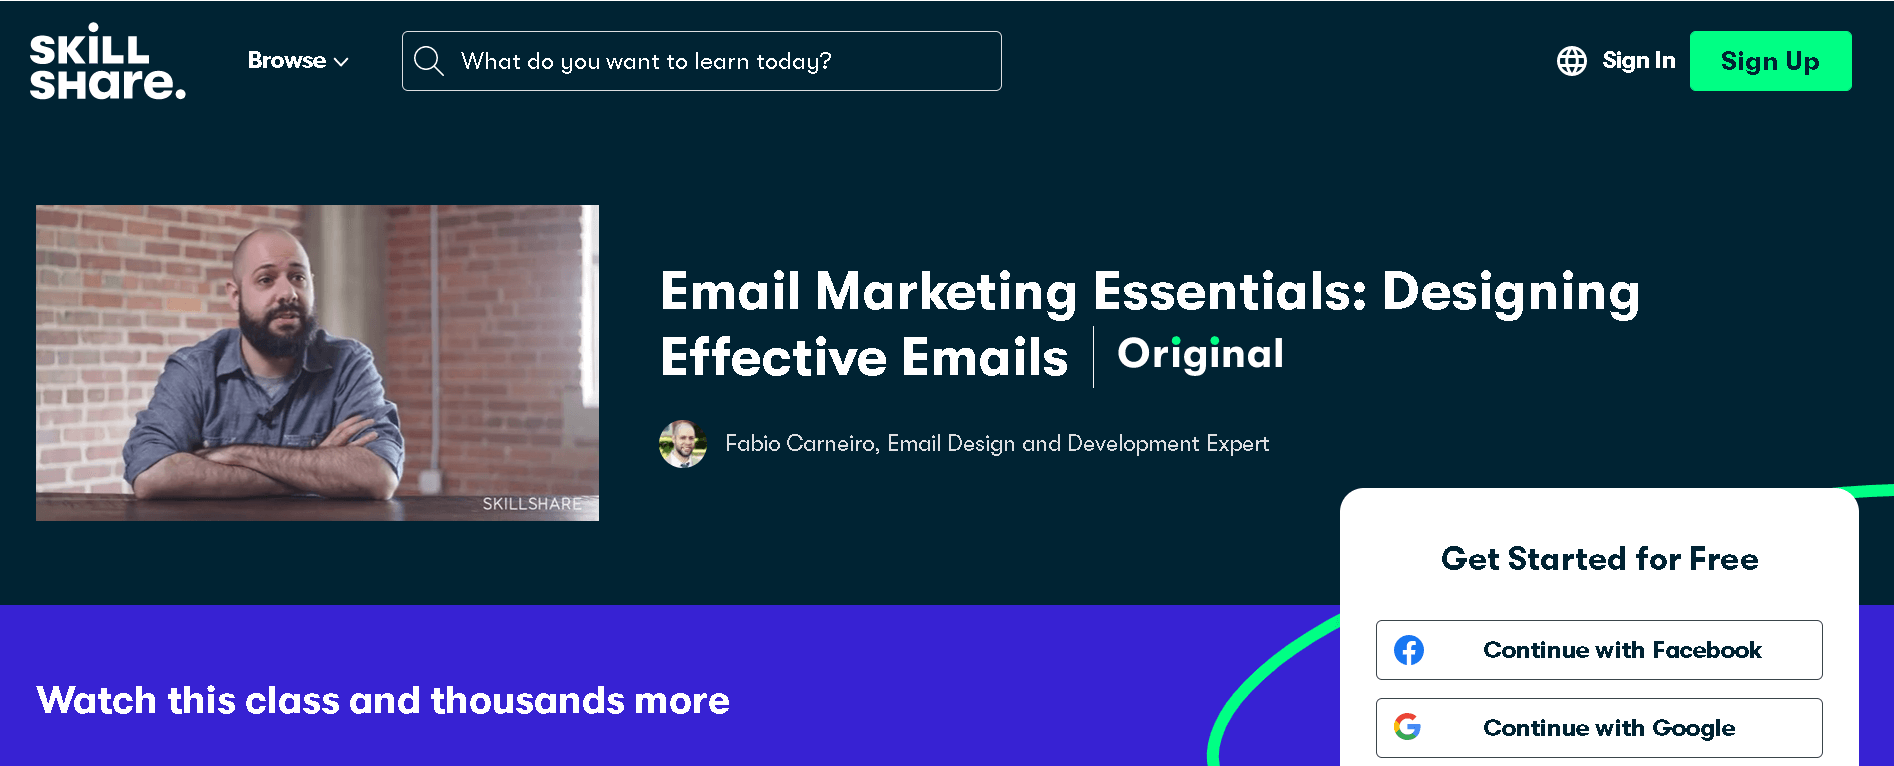 Email Marketing Essentials: Designing Effective Emails course by Skillshare